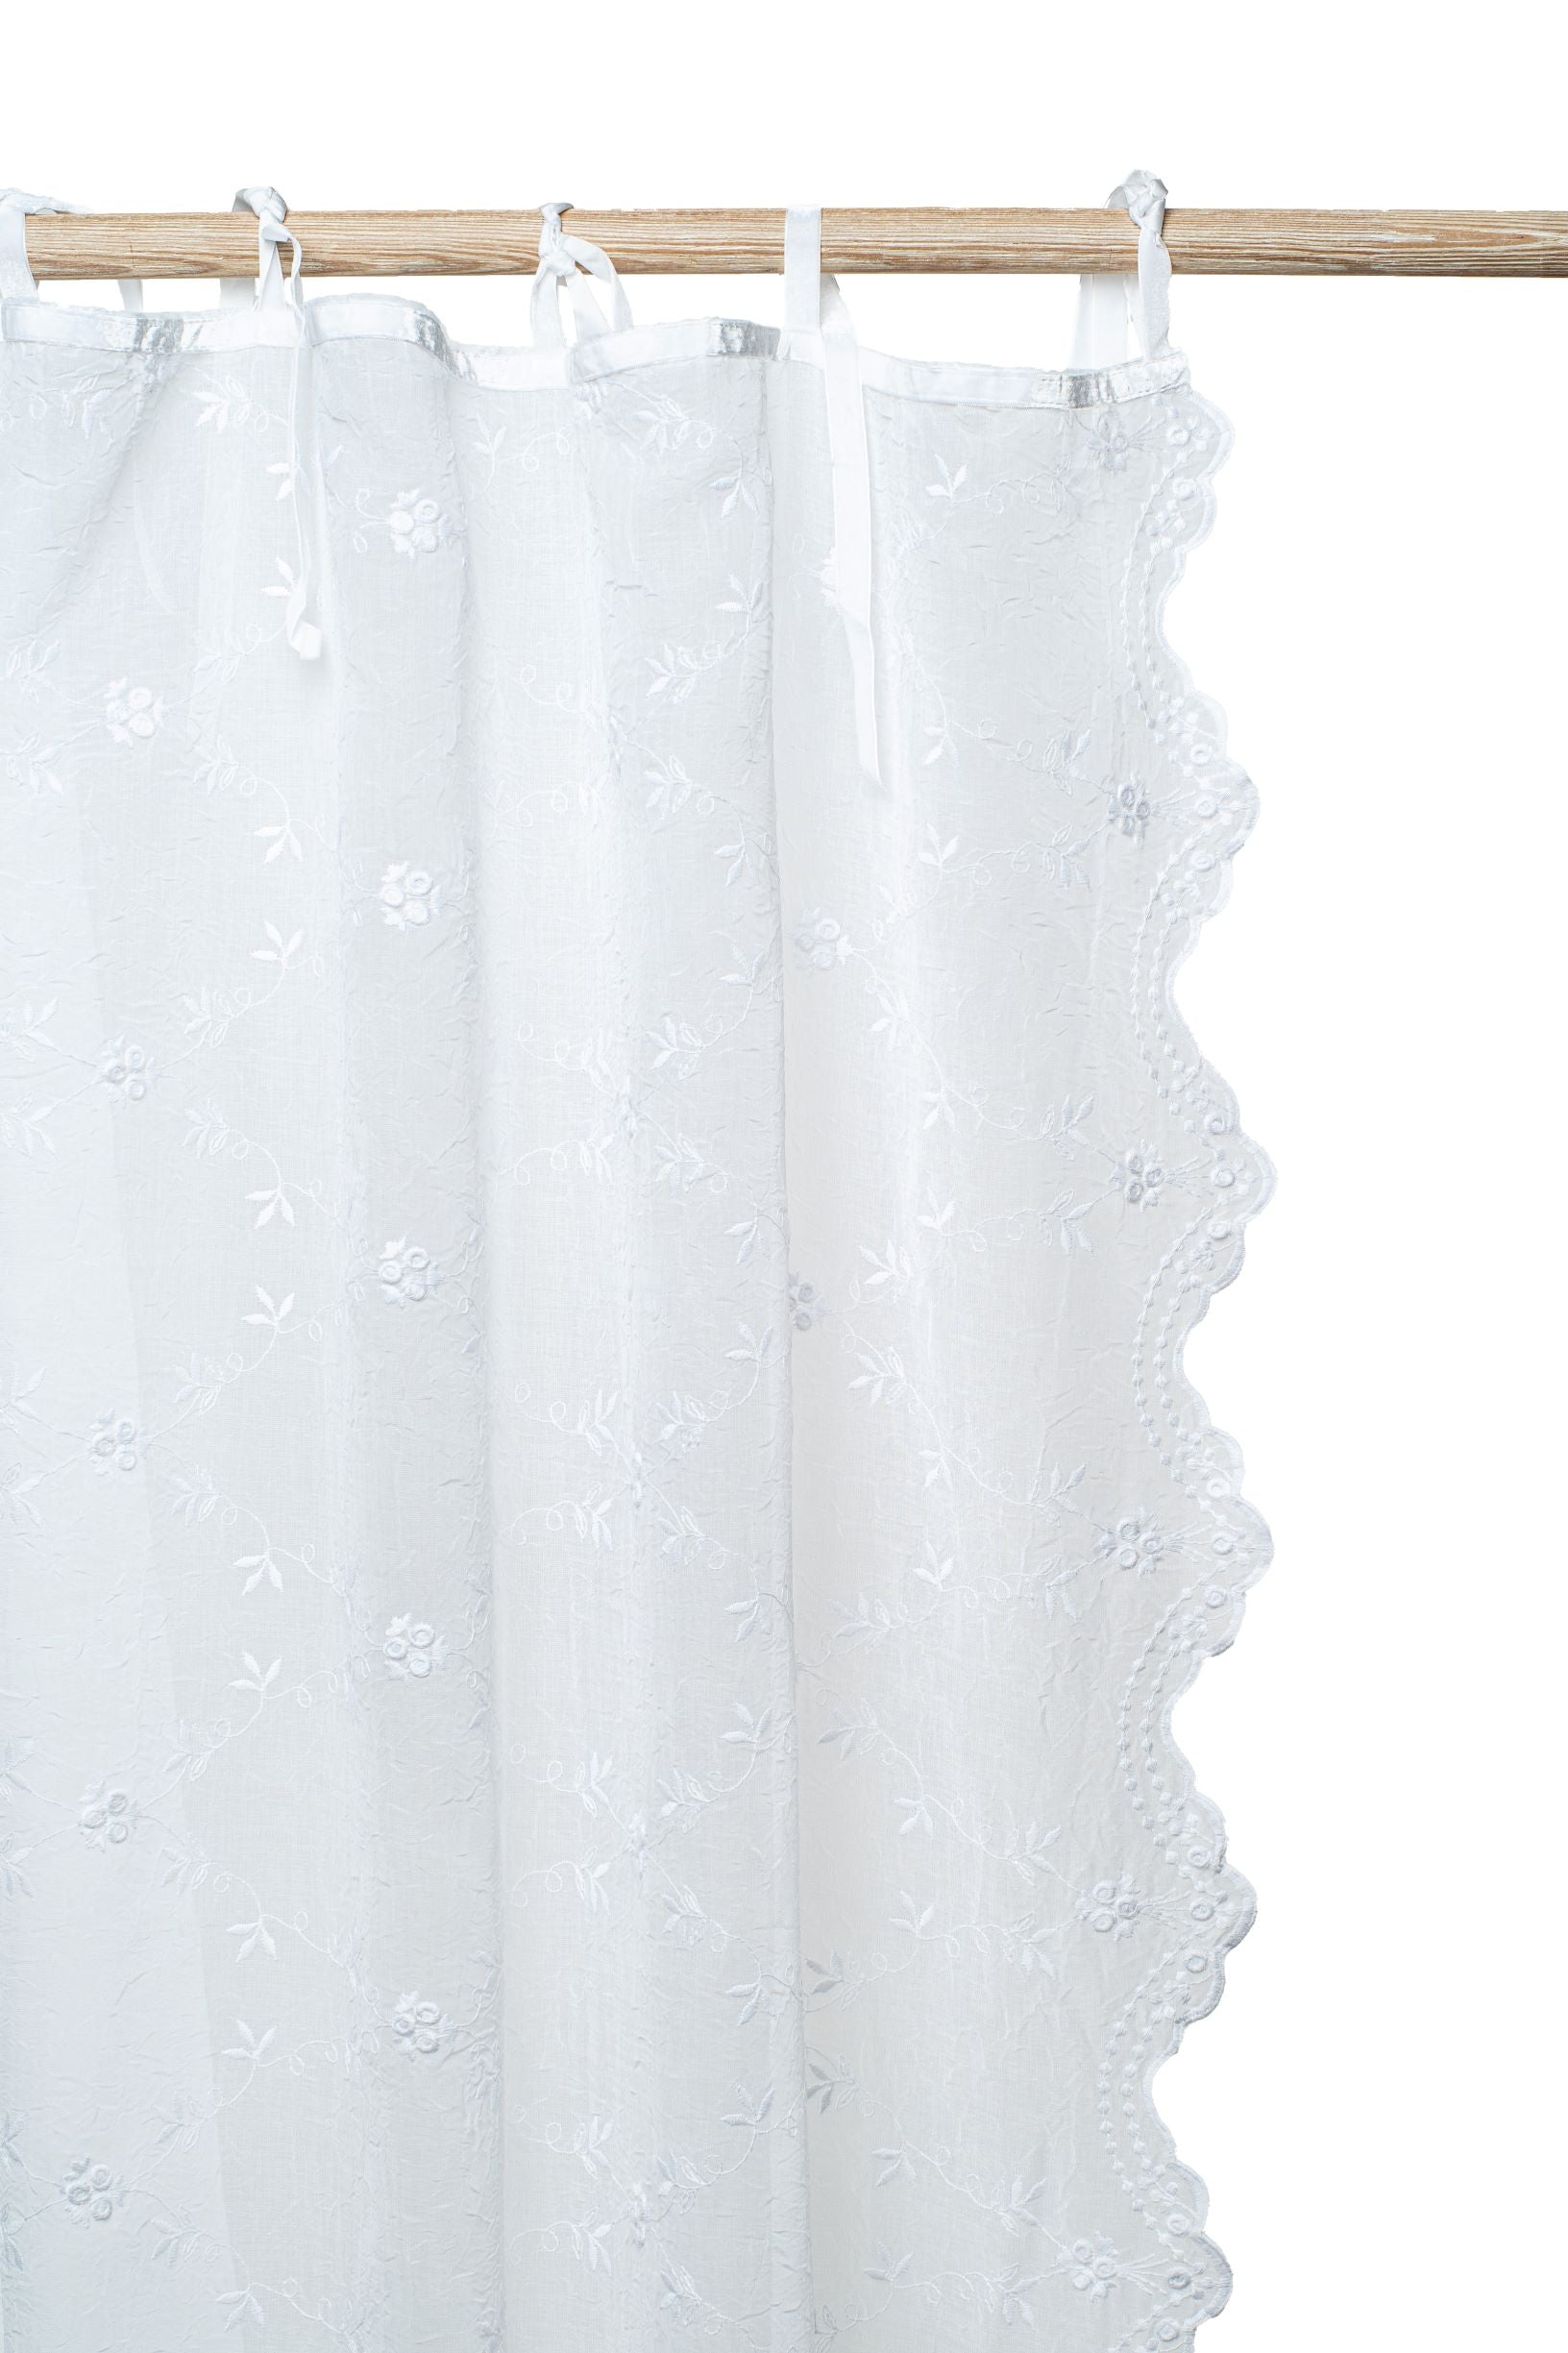 Off-white-Victoria-voile-curtain-with-scalloped-edges-adds-a-touch-of-elegance-to-a-living-room.